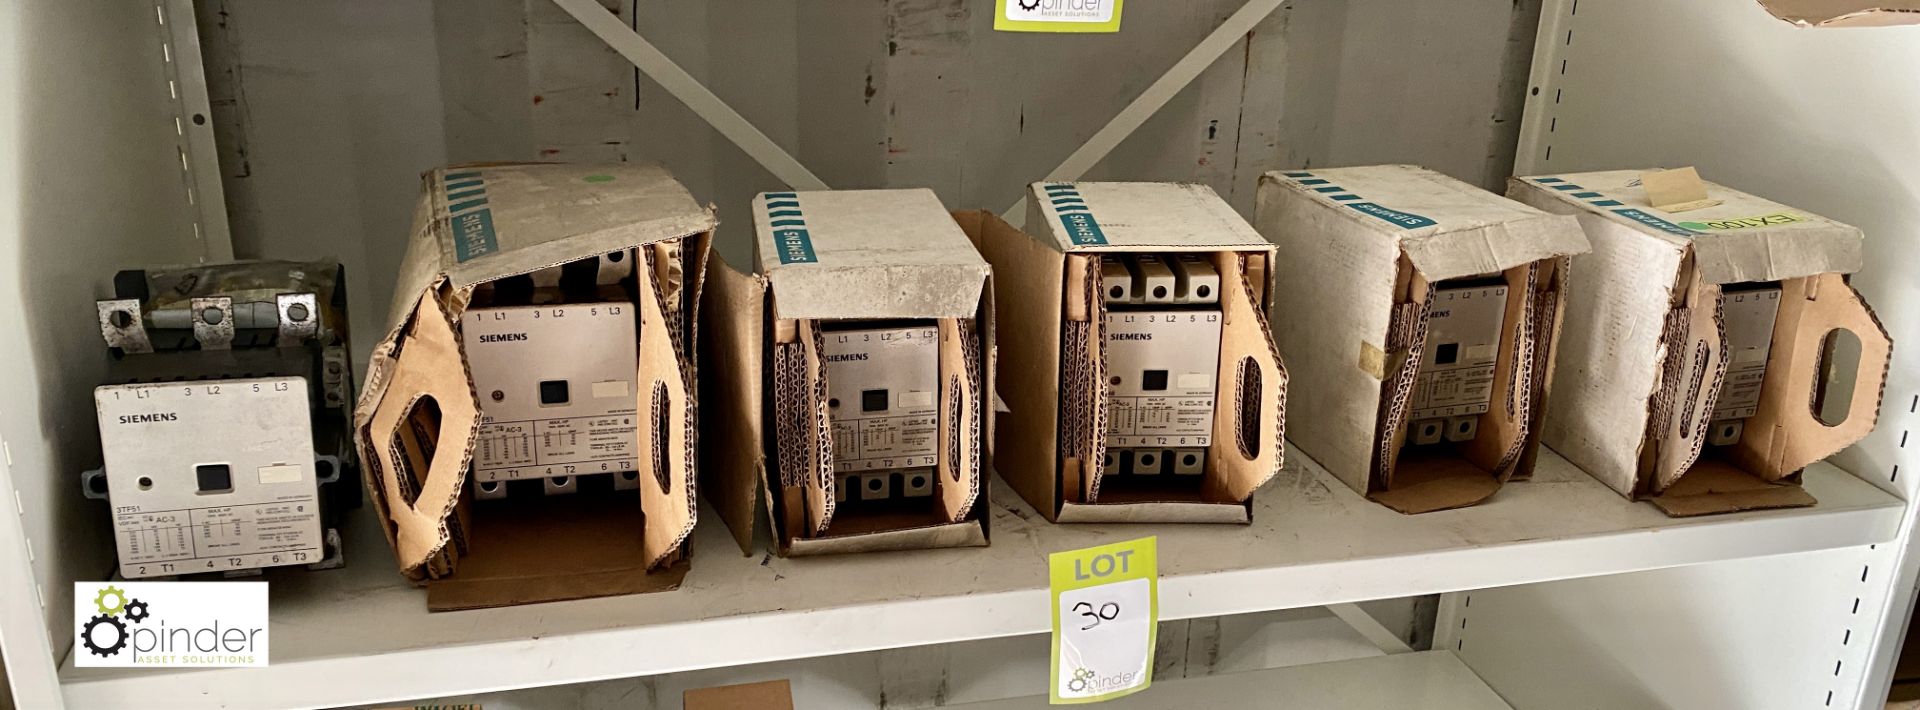 4 Siemens 3TF48 Contactors and 2 Siemens 3TF51 Contactors (container 1) (please note there is a lift